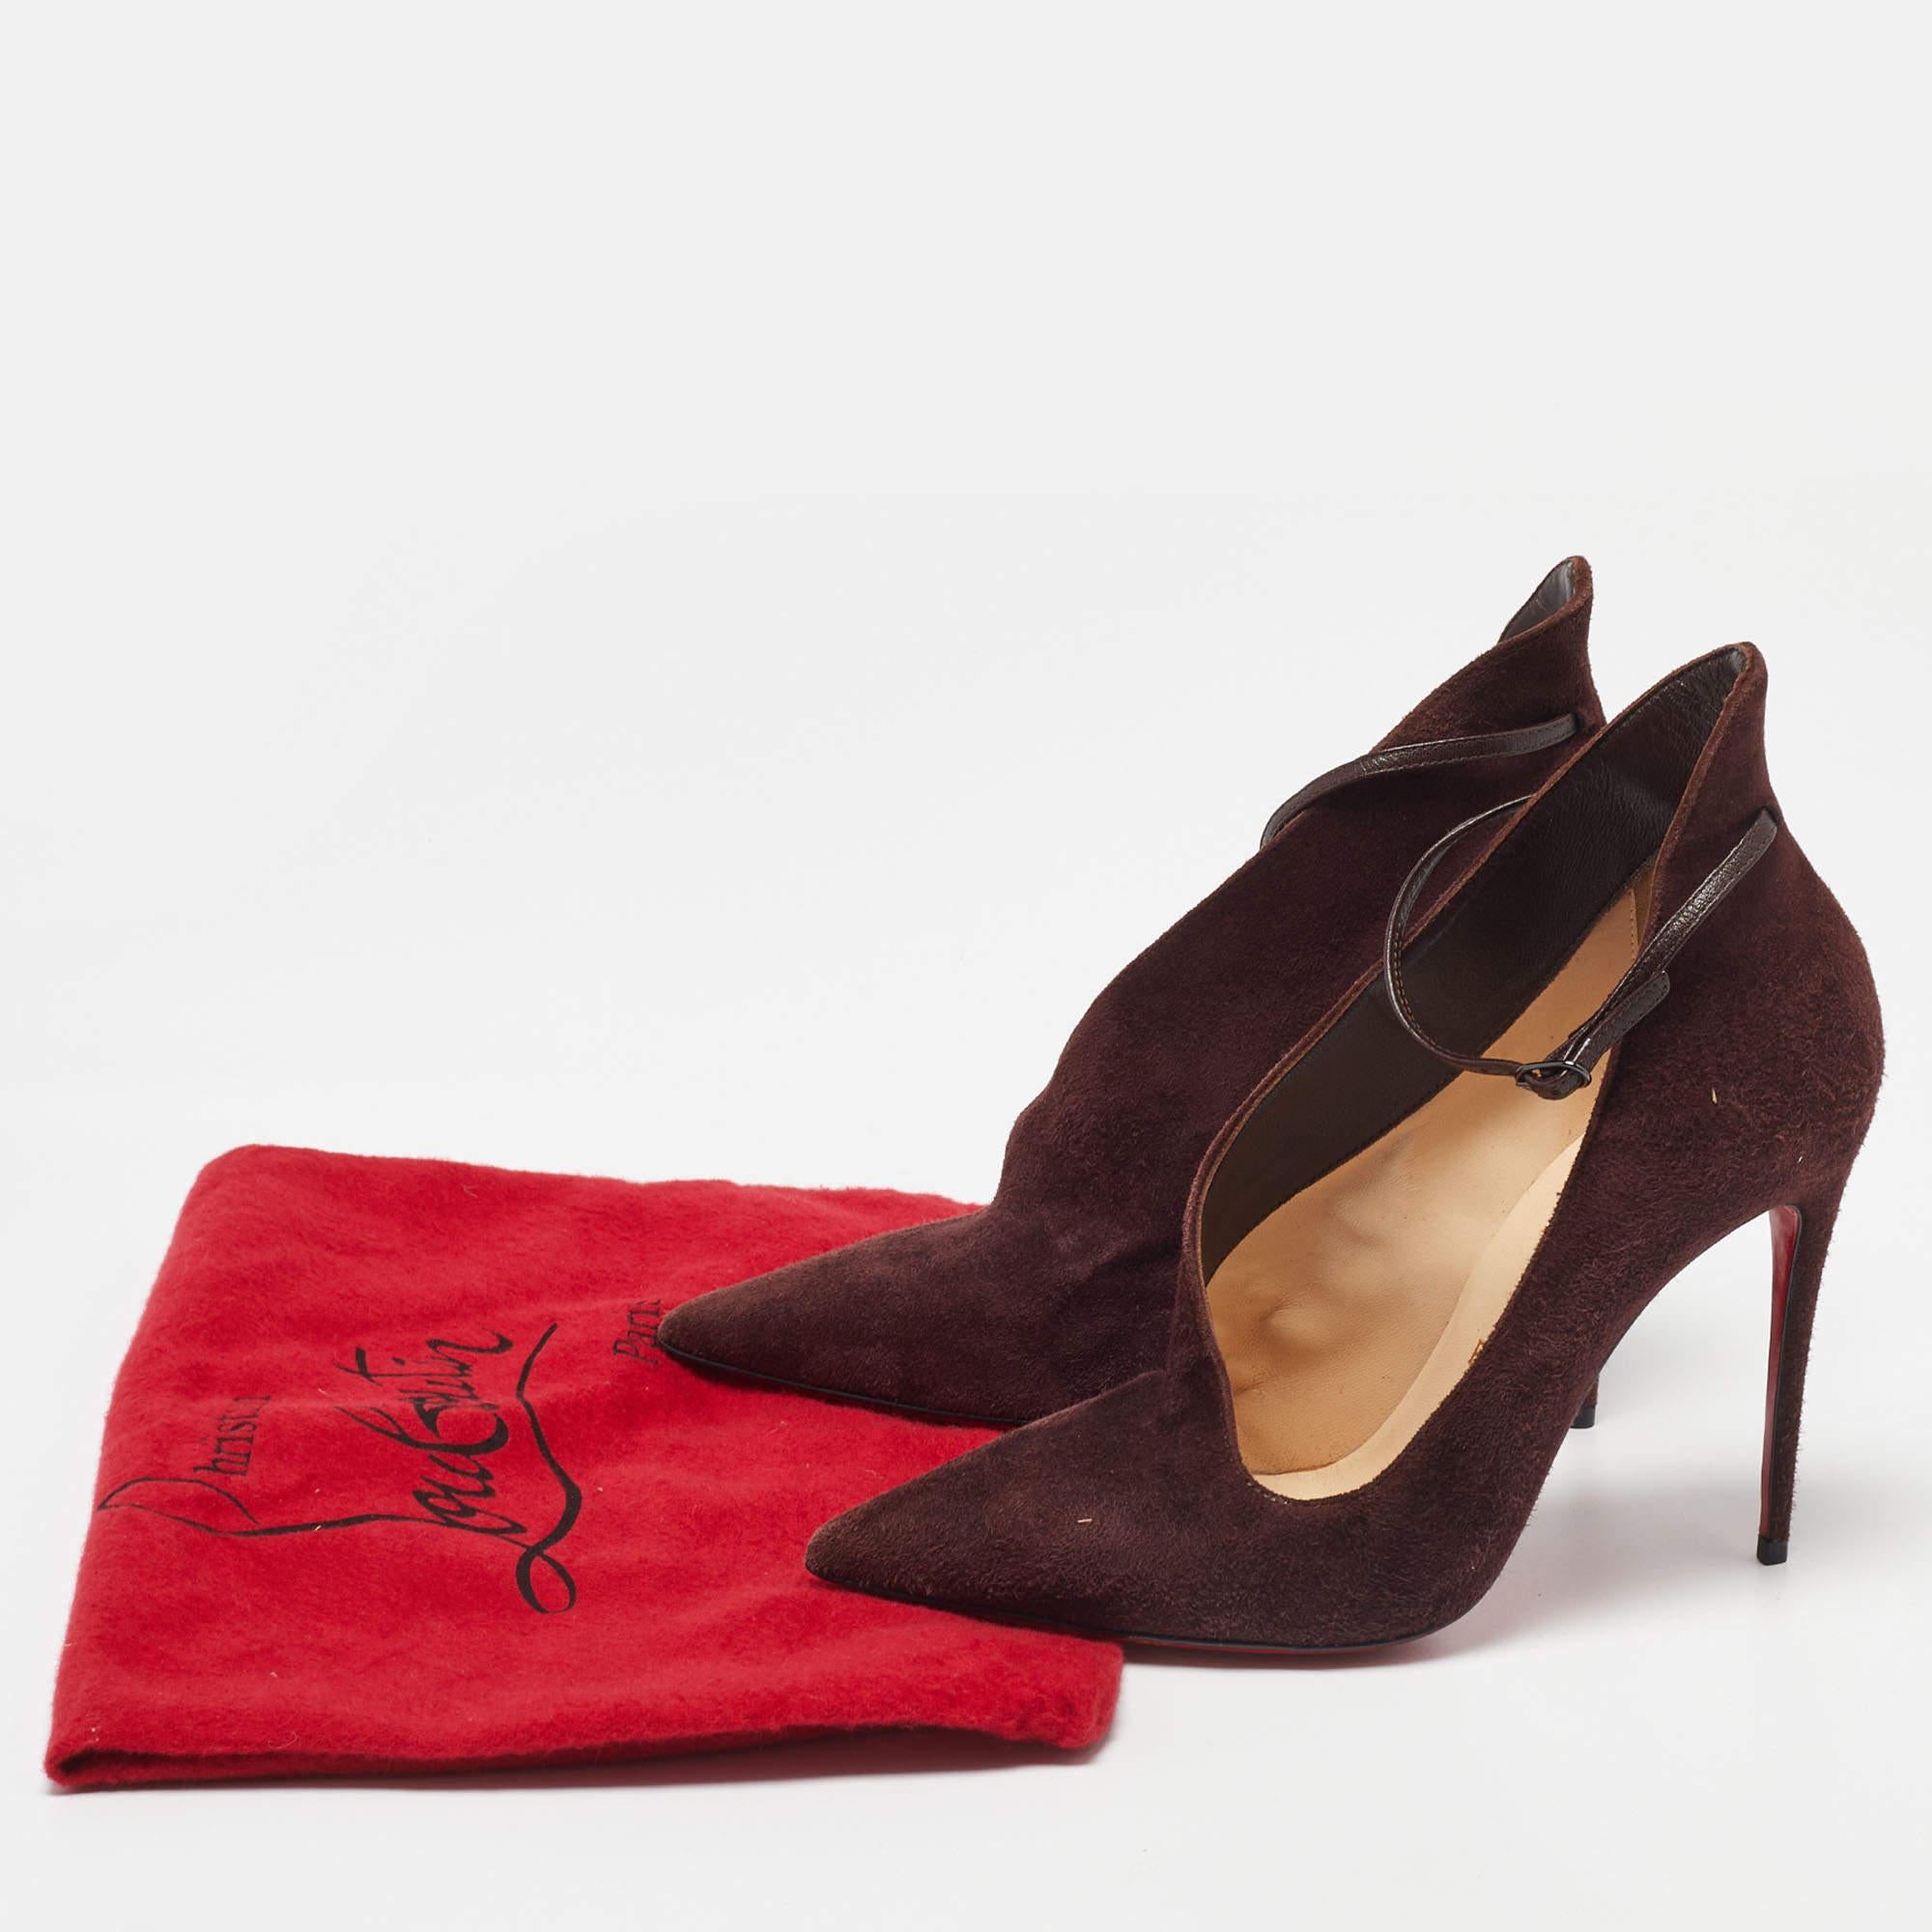 Christian Louboutin Dark Burgundy Suede Vampydoly Pumps Size 36 For Sale 4